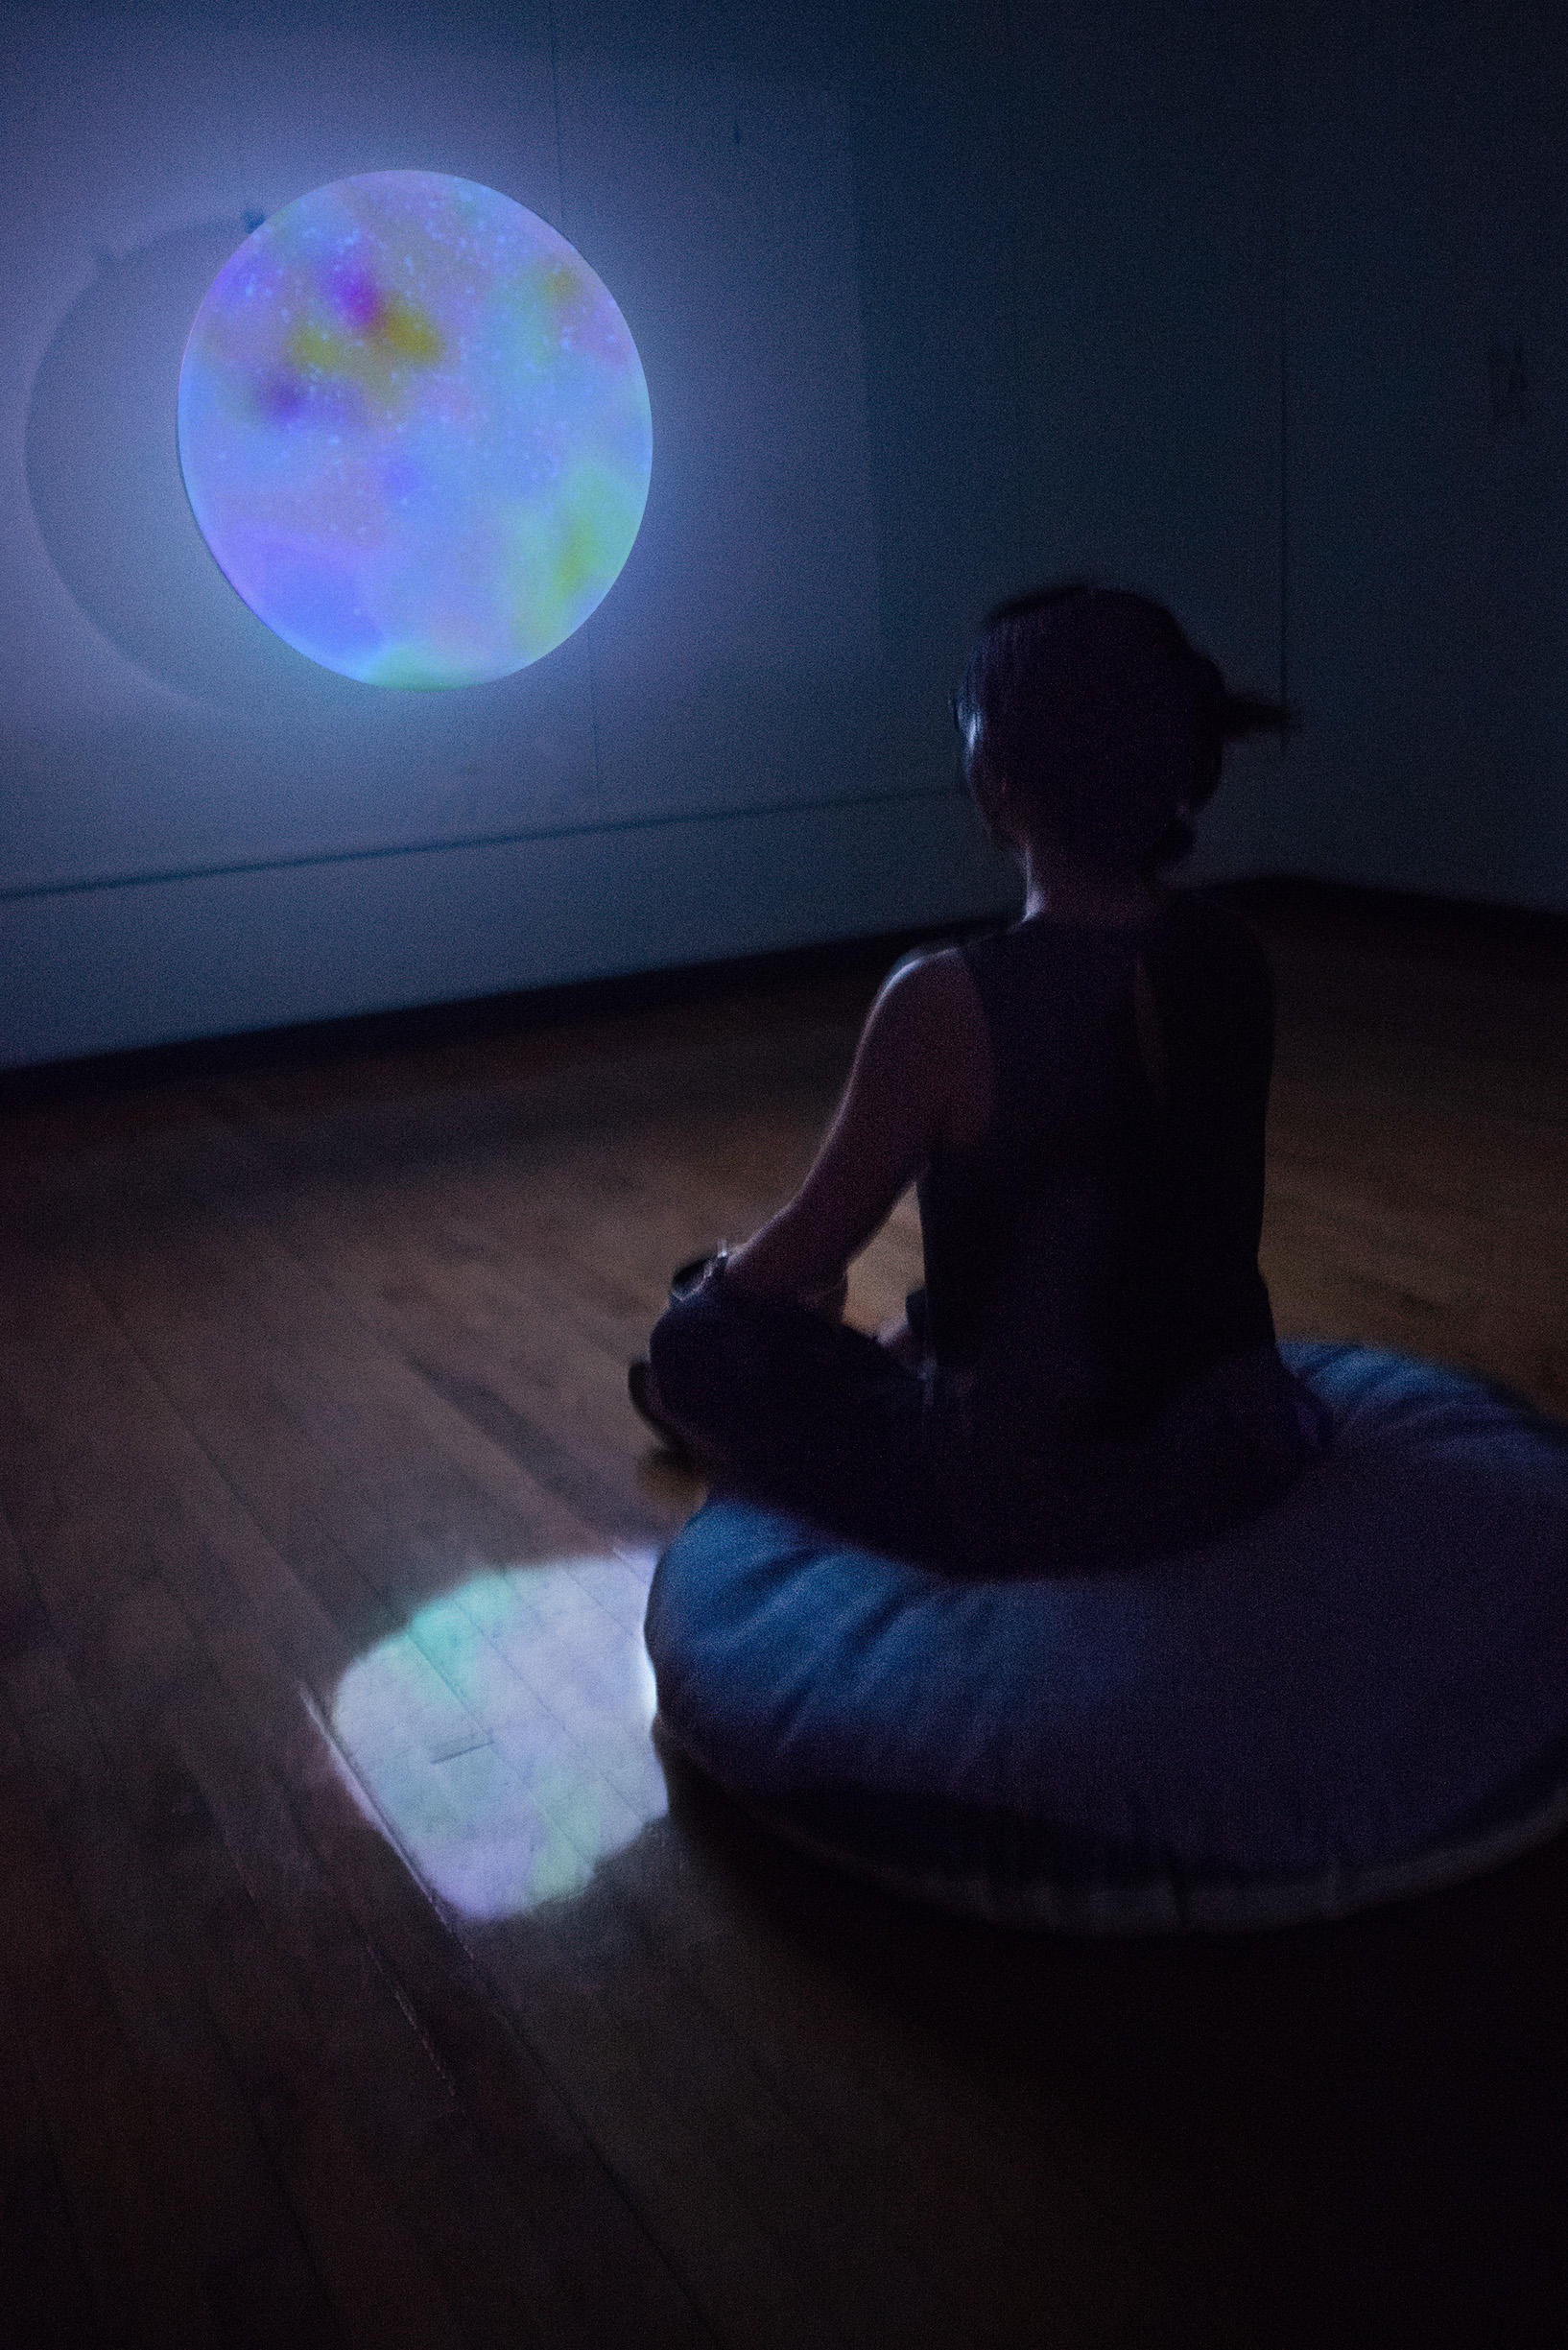 Projected glowing image with person sitting cross-legged in front of screen